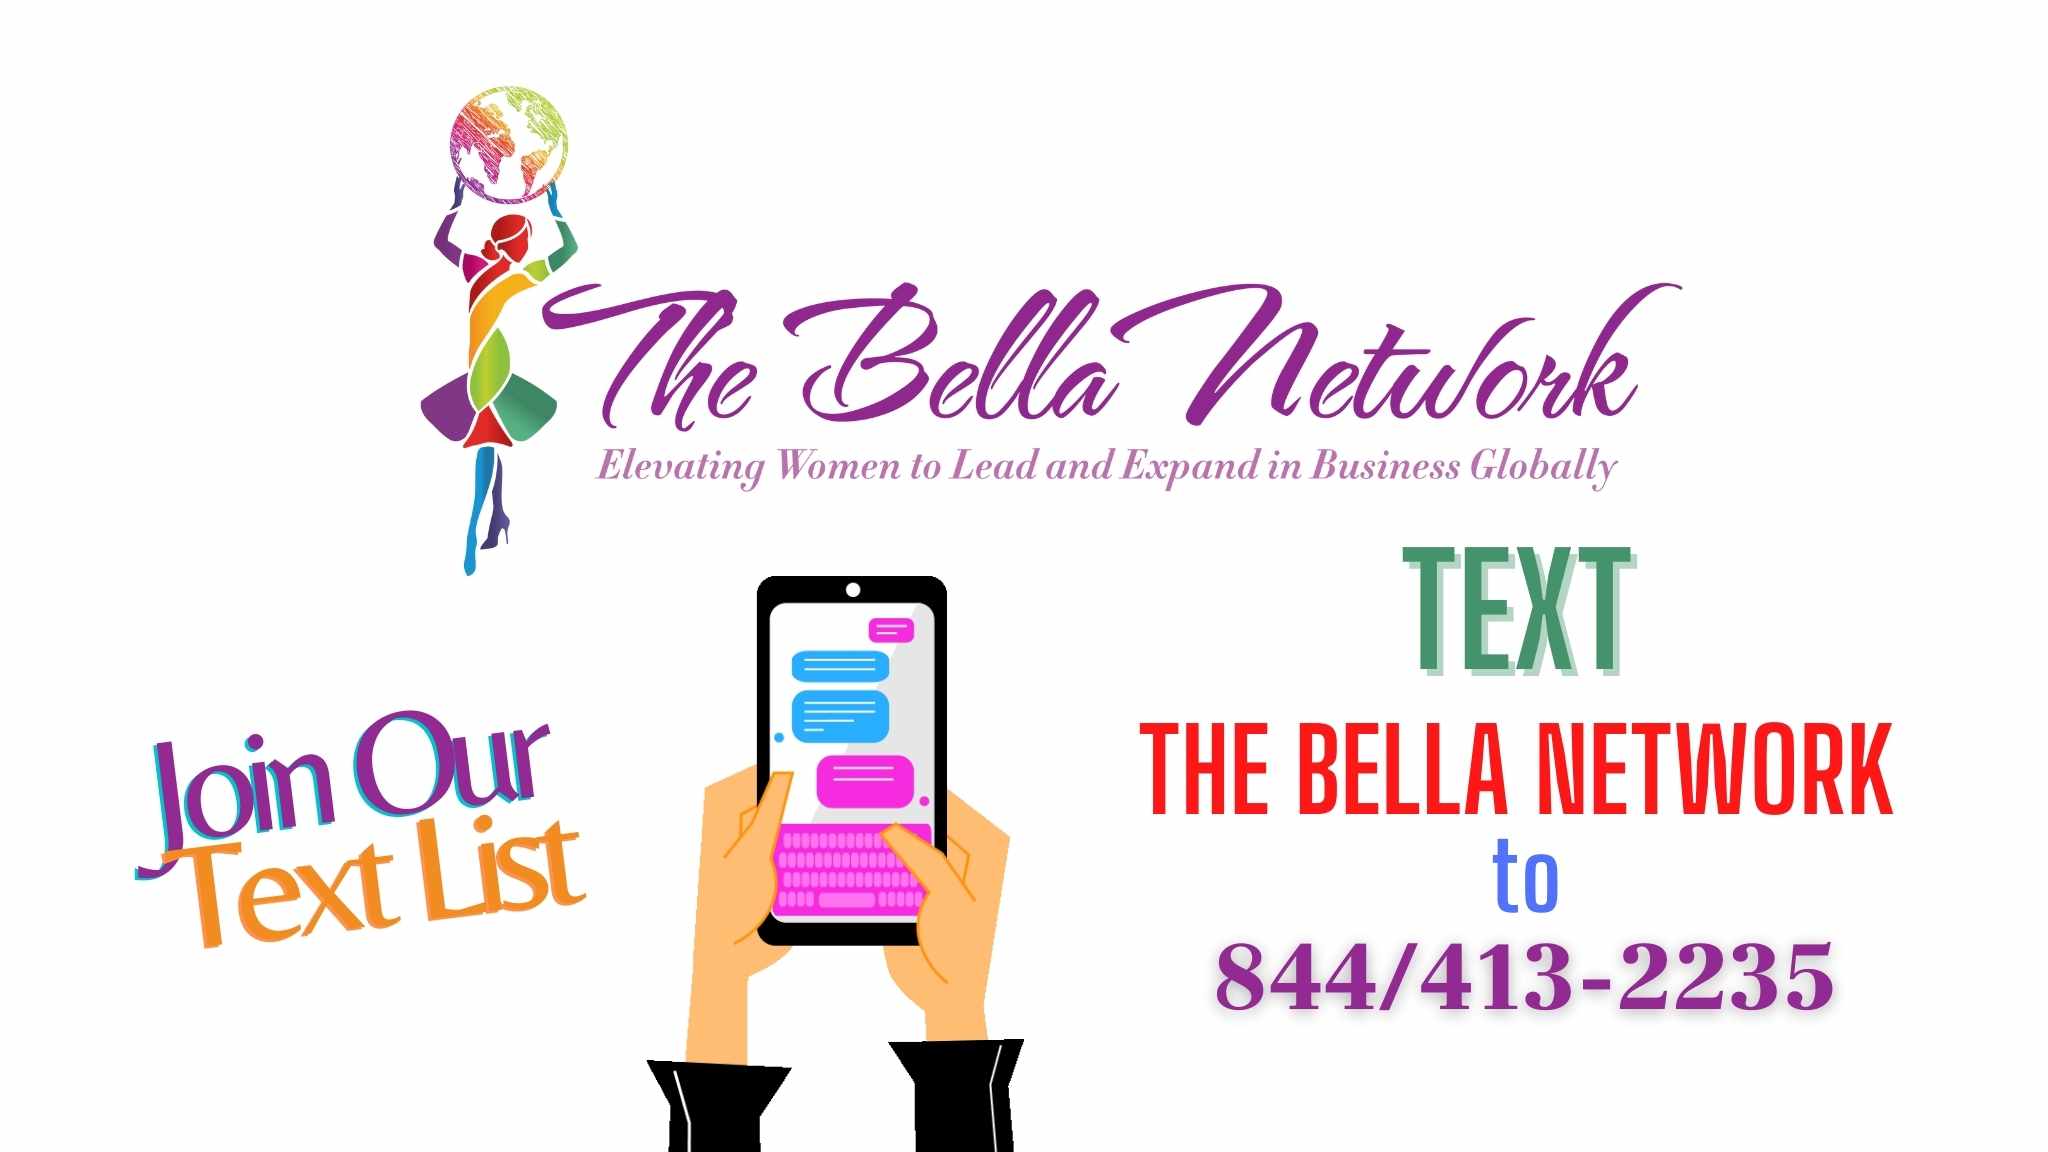 Text The Bella Network to 844/413-2235